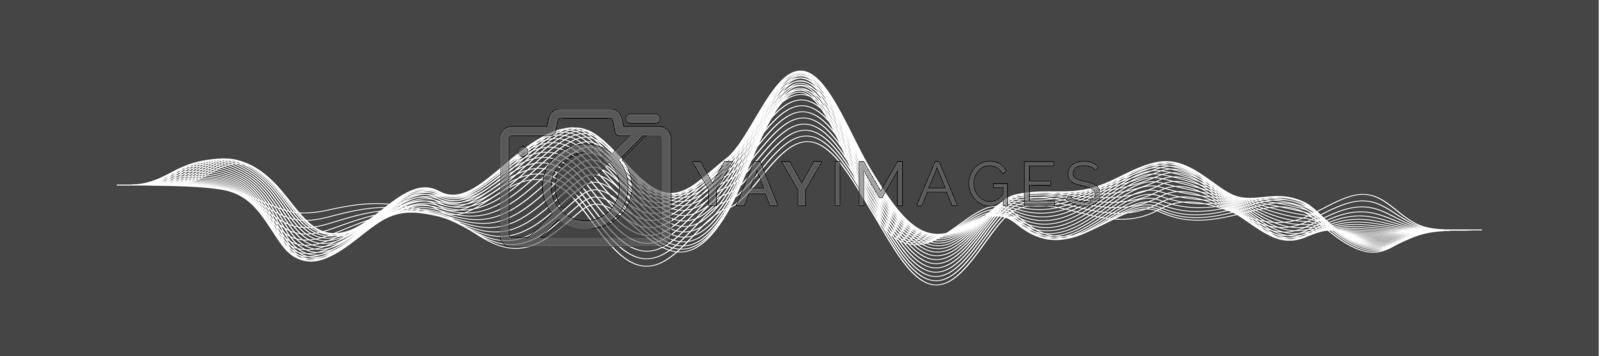 Royalty free image of Radio waves vector. Radio frequency identification. Wireless communication. Sound waves abstract vector illustration by DmytroRazinkov